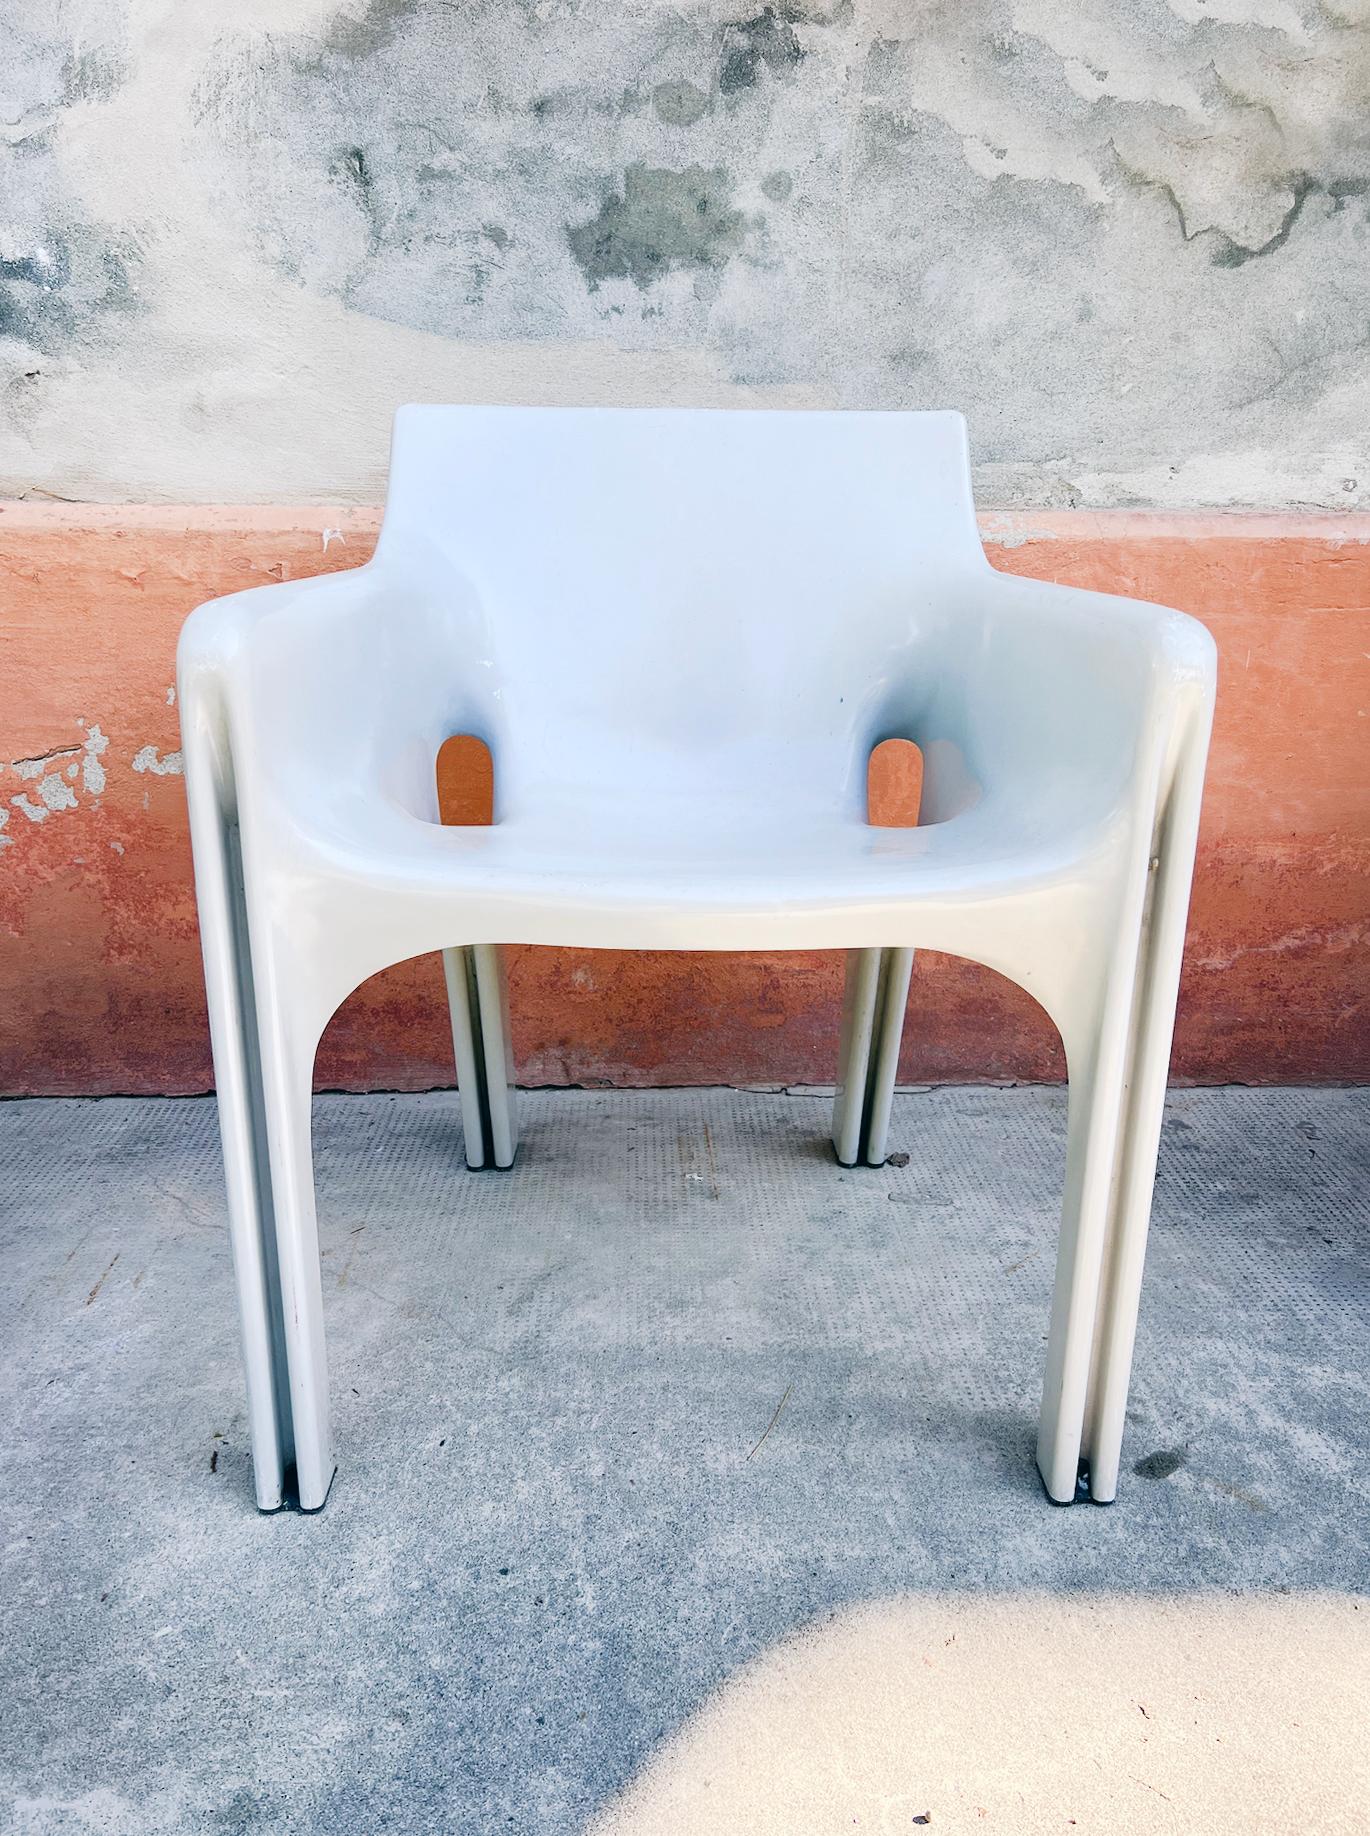 Designed by Vico Magistretti  for Artemide Italy in the 1970's. -  Off-white fiberglass. In great vintage condition
Vico was an Italian architect who was also active as an industrial designer, furniture designer, and academic.  Magistretti's works